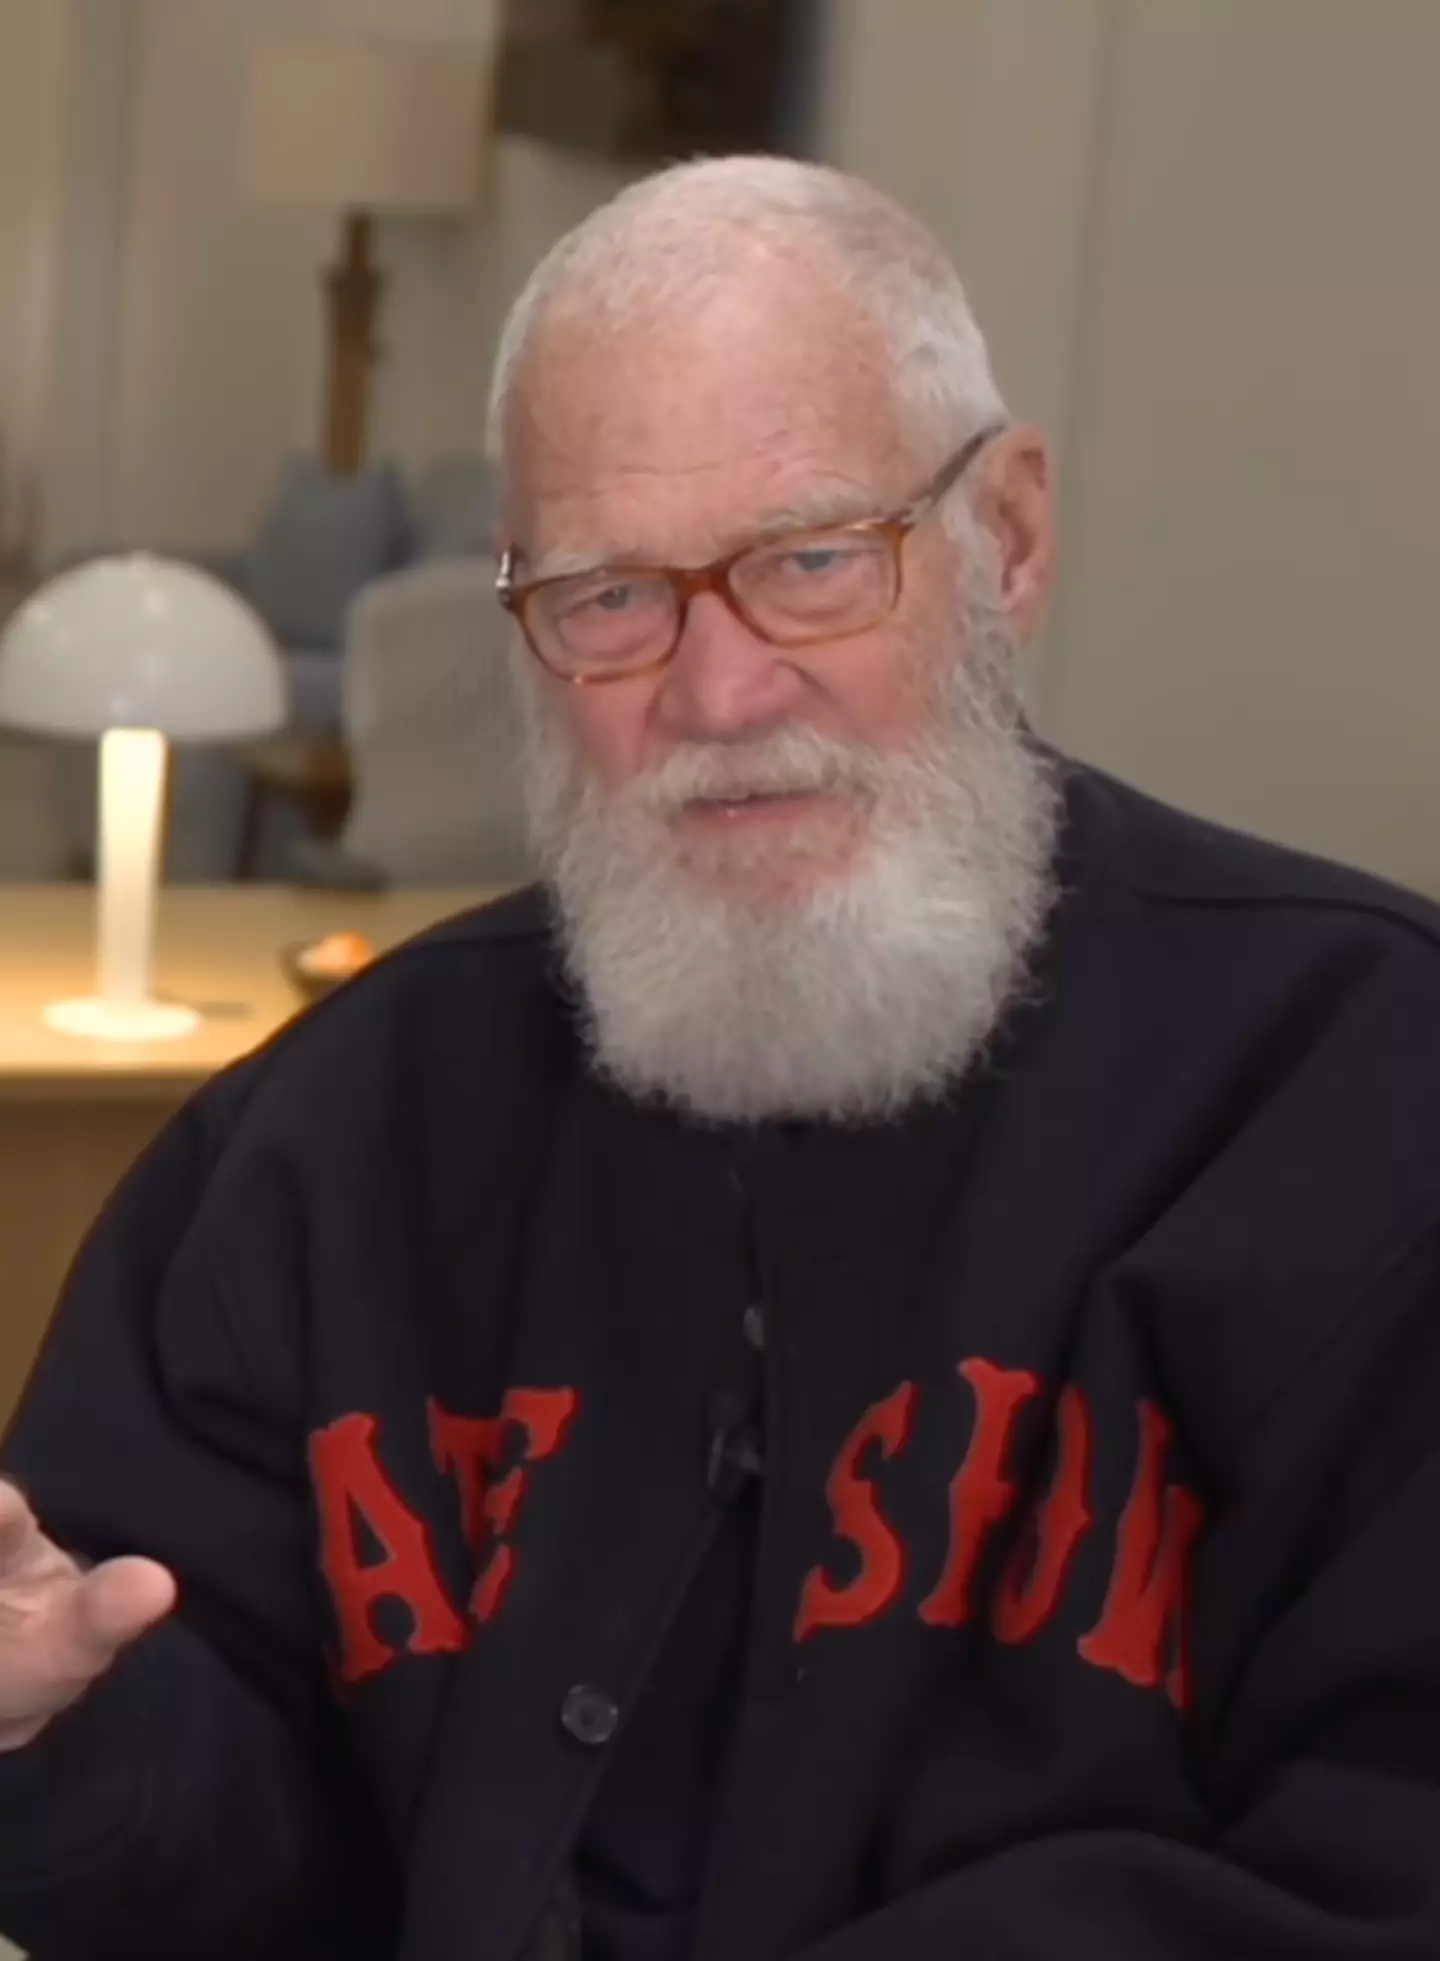 Letterman said he was sick and tired of the critics.